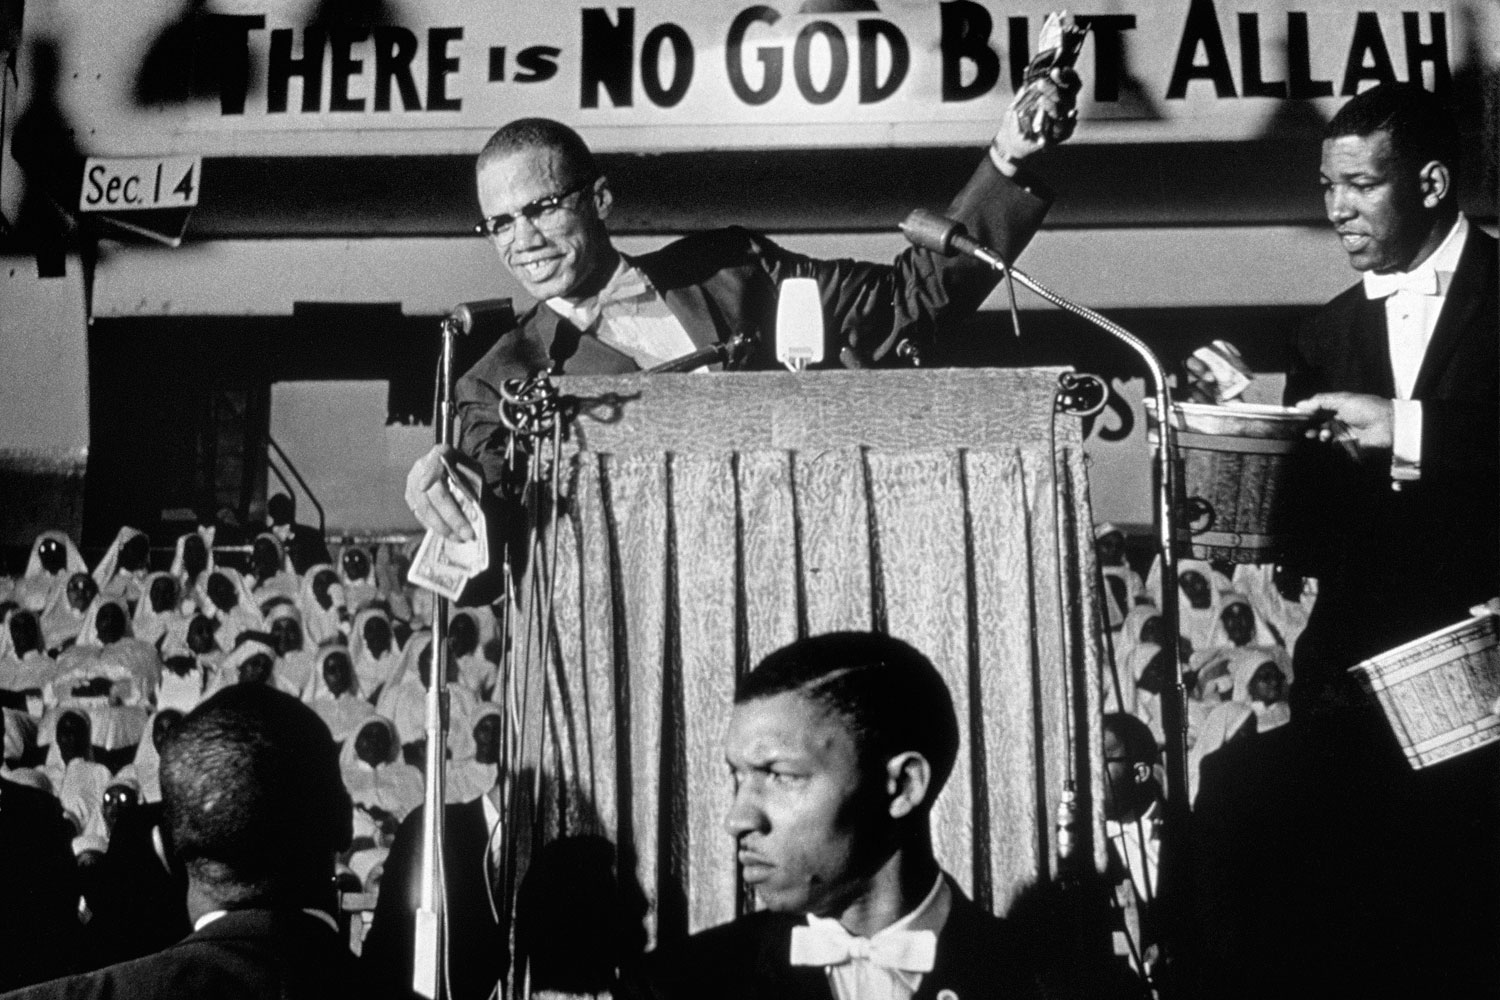 Malcolm X gives a speech at a Nation of Islam rally, Washington, D.C., 1961.